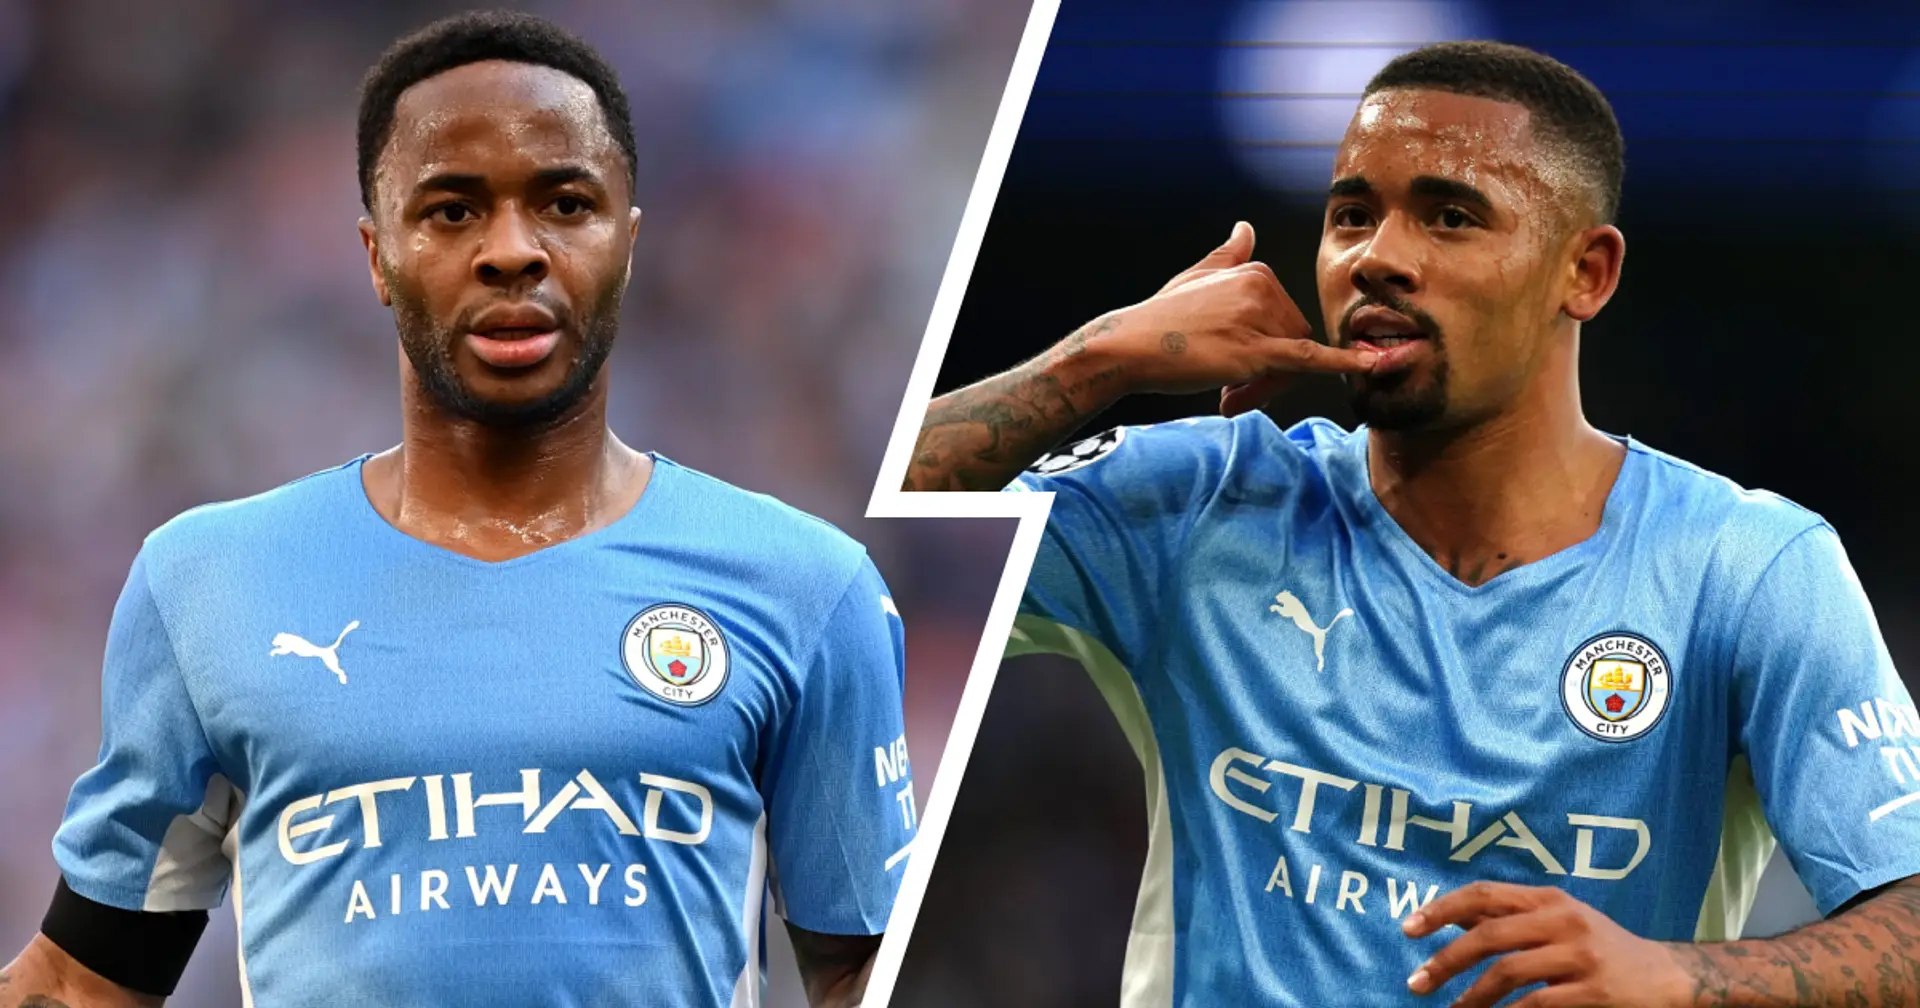 Gabriel Jesus and Sterling both linked with Chelsea - who would you choose and why?